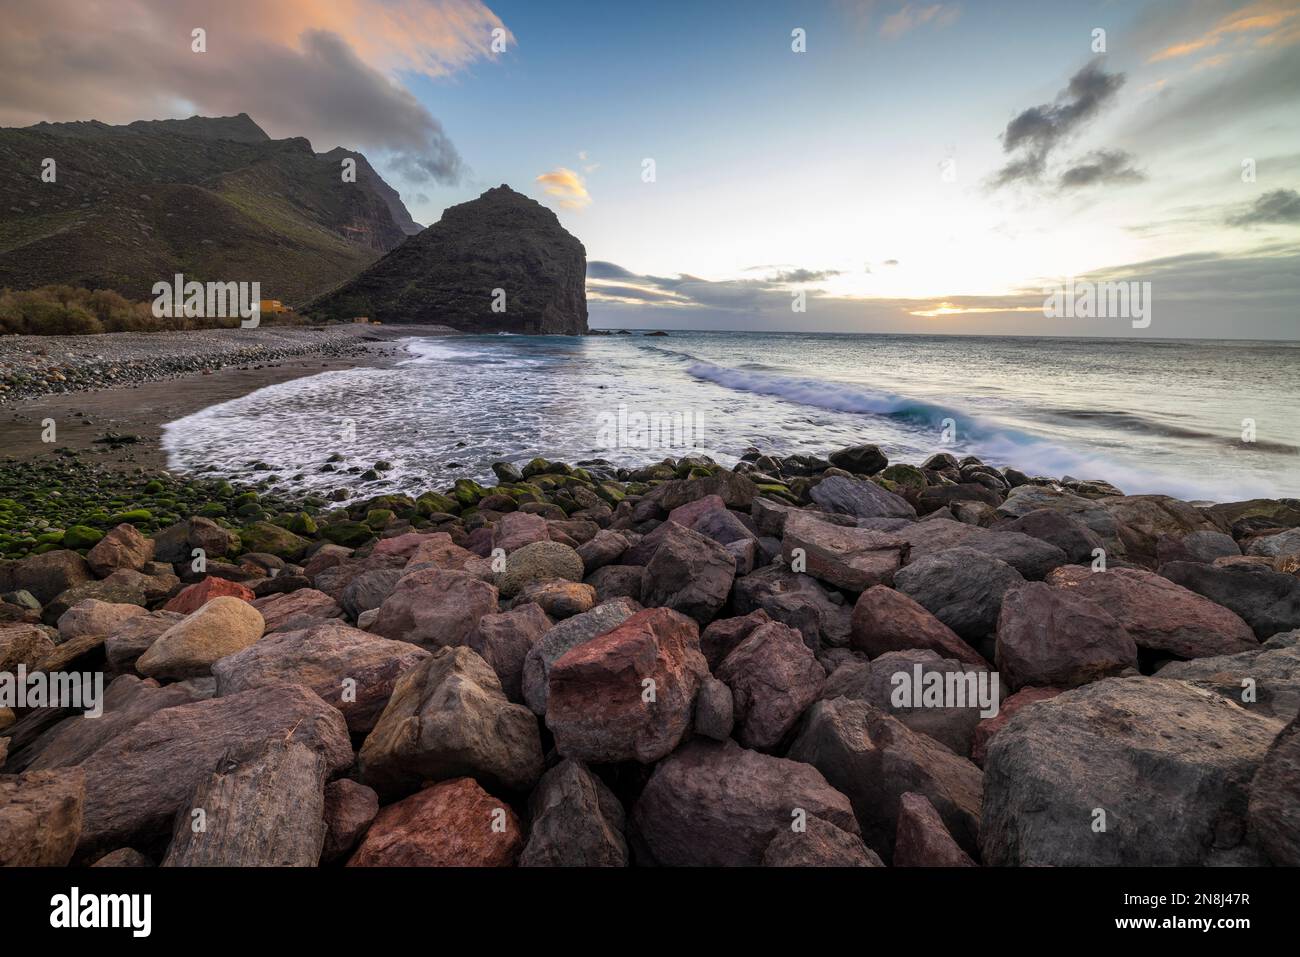 The sunset from the rocky beach. Mountain on the left, ocean on the right, and rocky beach with green stones on the bottom. No people. Some clouds. Stock Photo